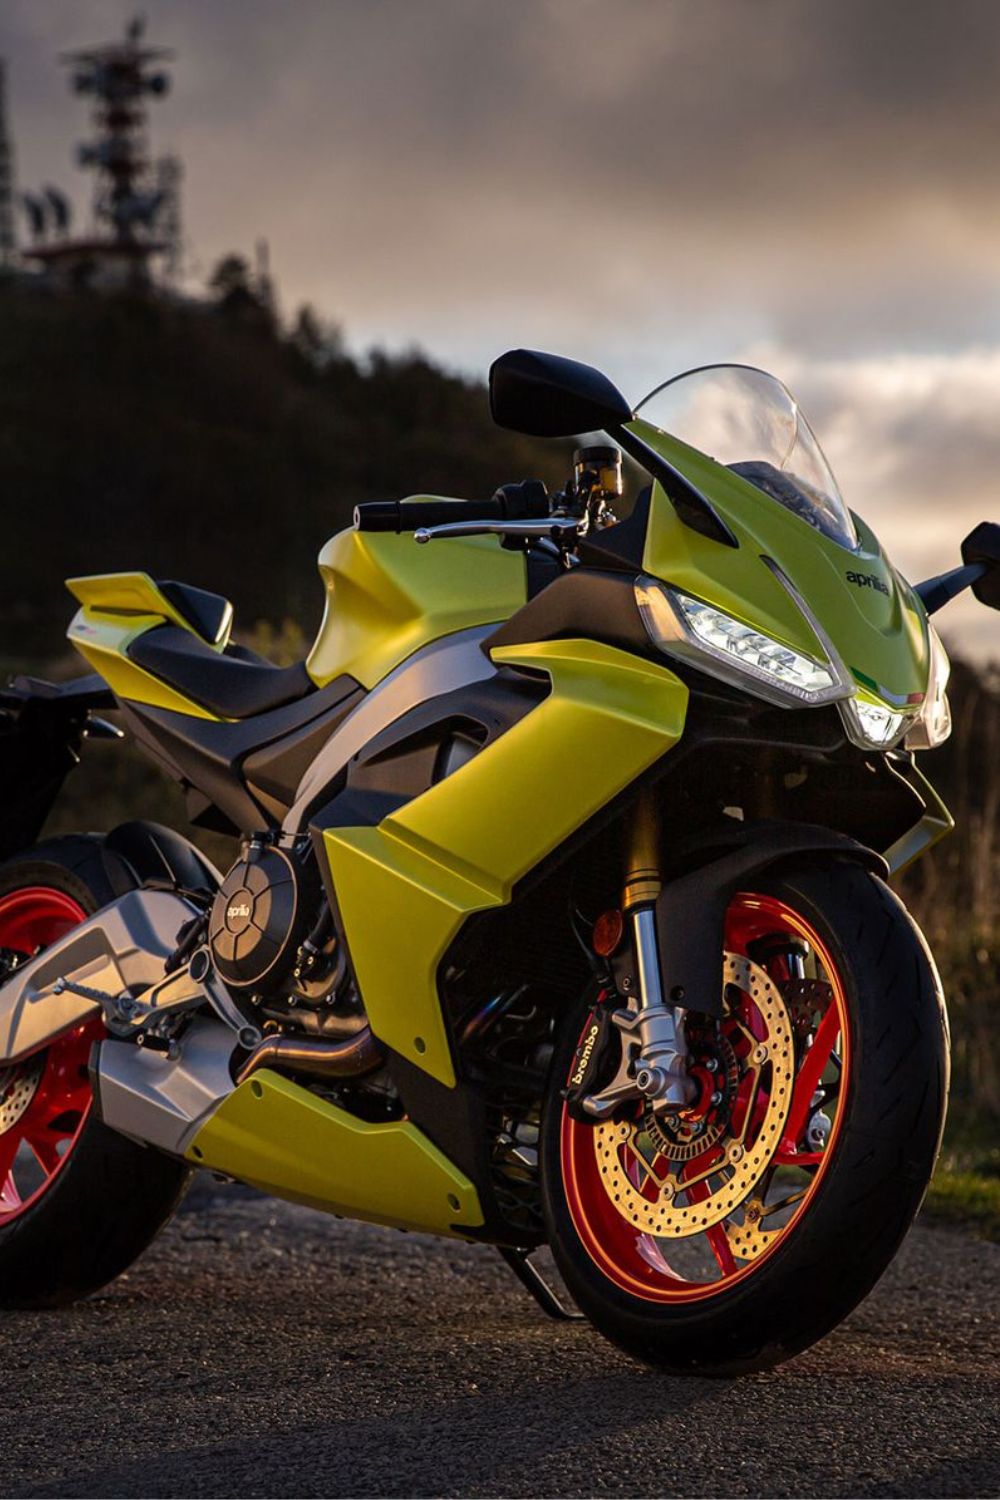 2021 Aprilia RS 660 With Twin-Cylinder 660 cc